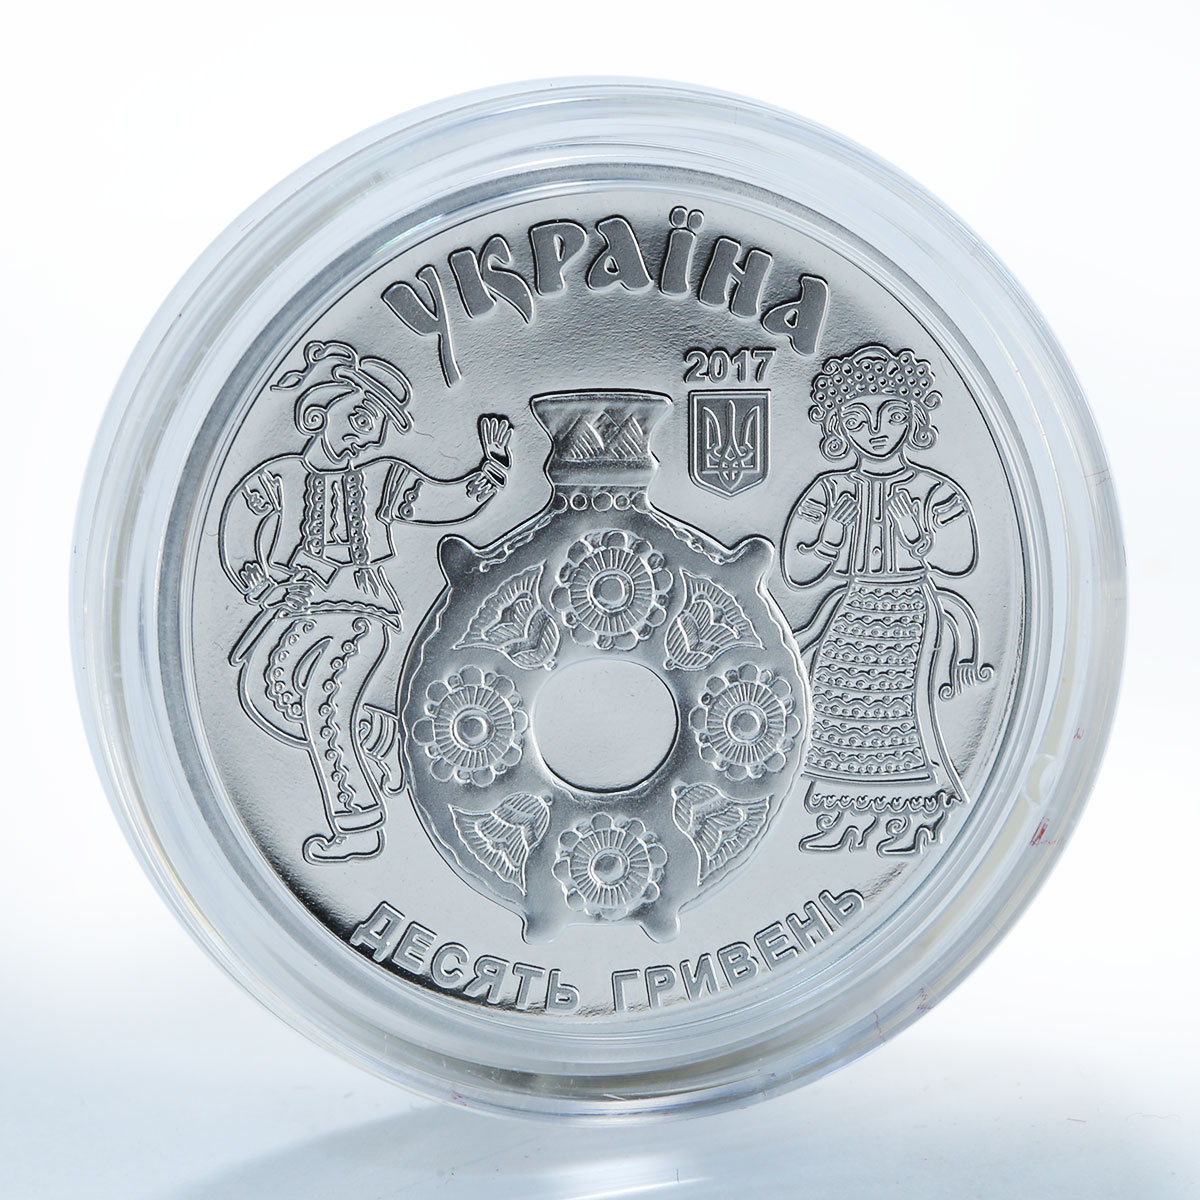 Ukraine 10 hryvnia Kosiv Painting Style Traditional Ceramics silver coin 2017